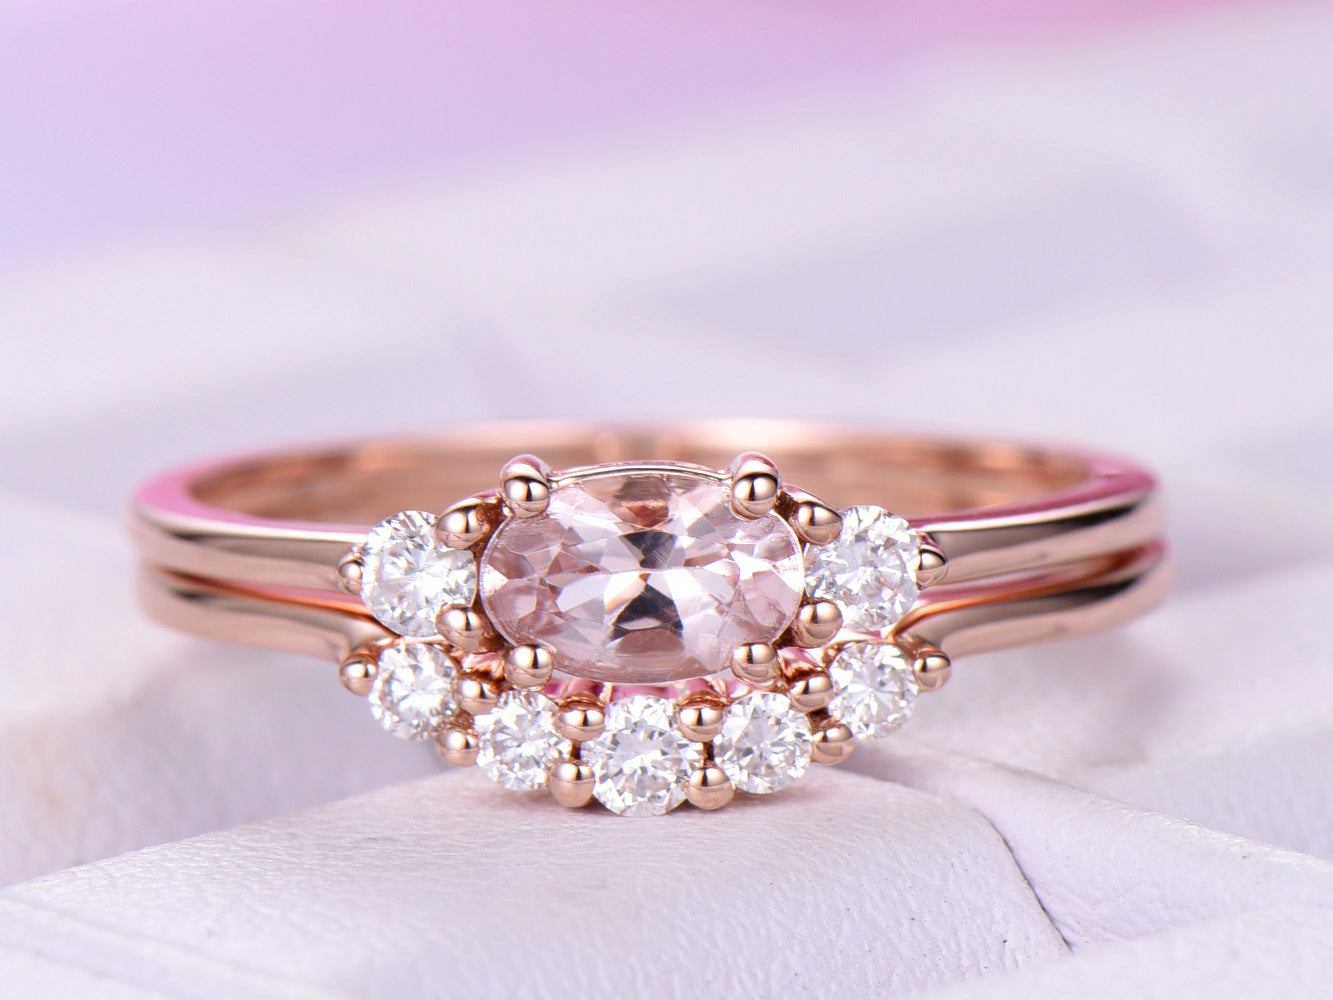 Reserved for Misty,payments, Oval Morganite Ring Bridal Sets Contoured Diamond Wedding Band 14K Gold